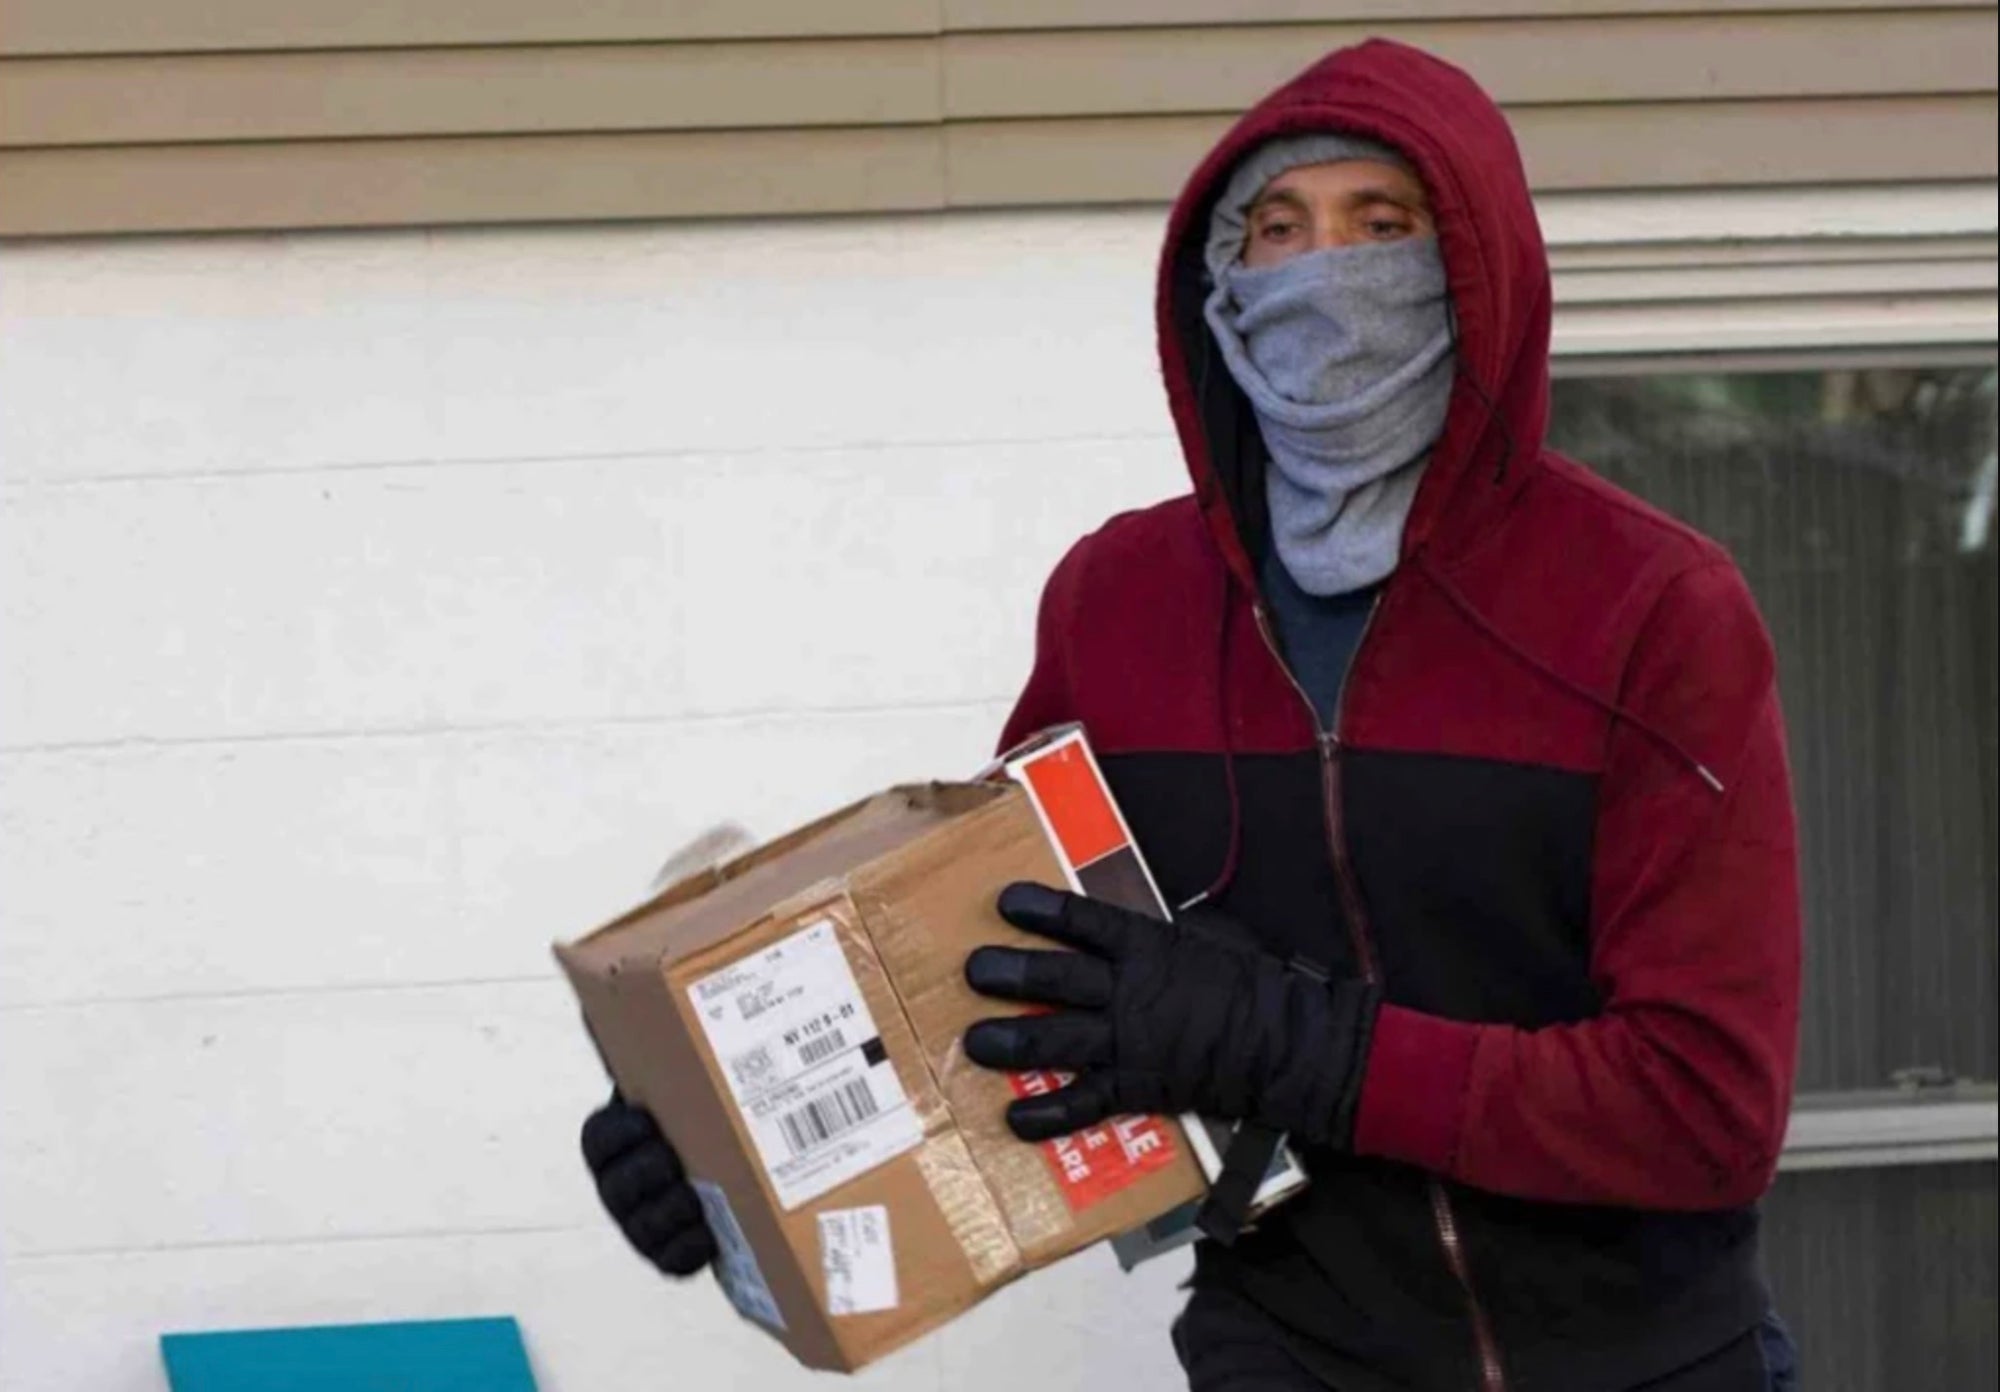 How to Stop Porch Pirates: Get Revenge...Or Get CITIBIN